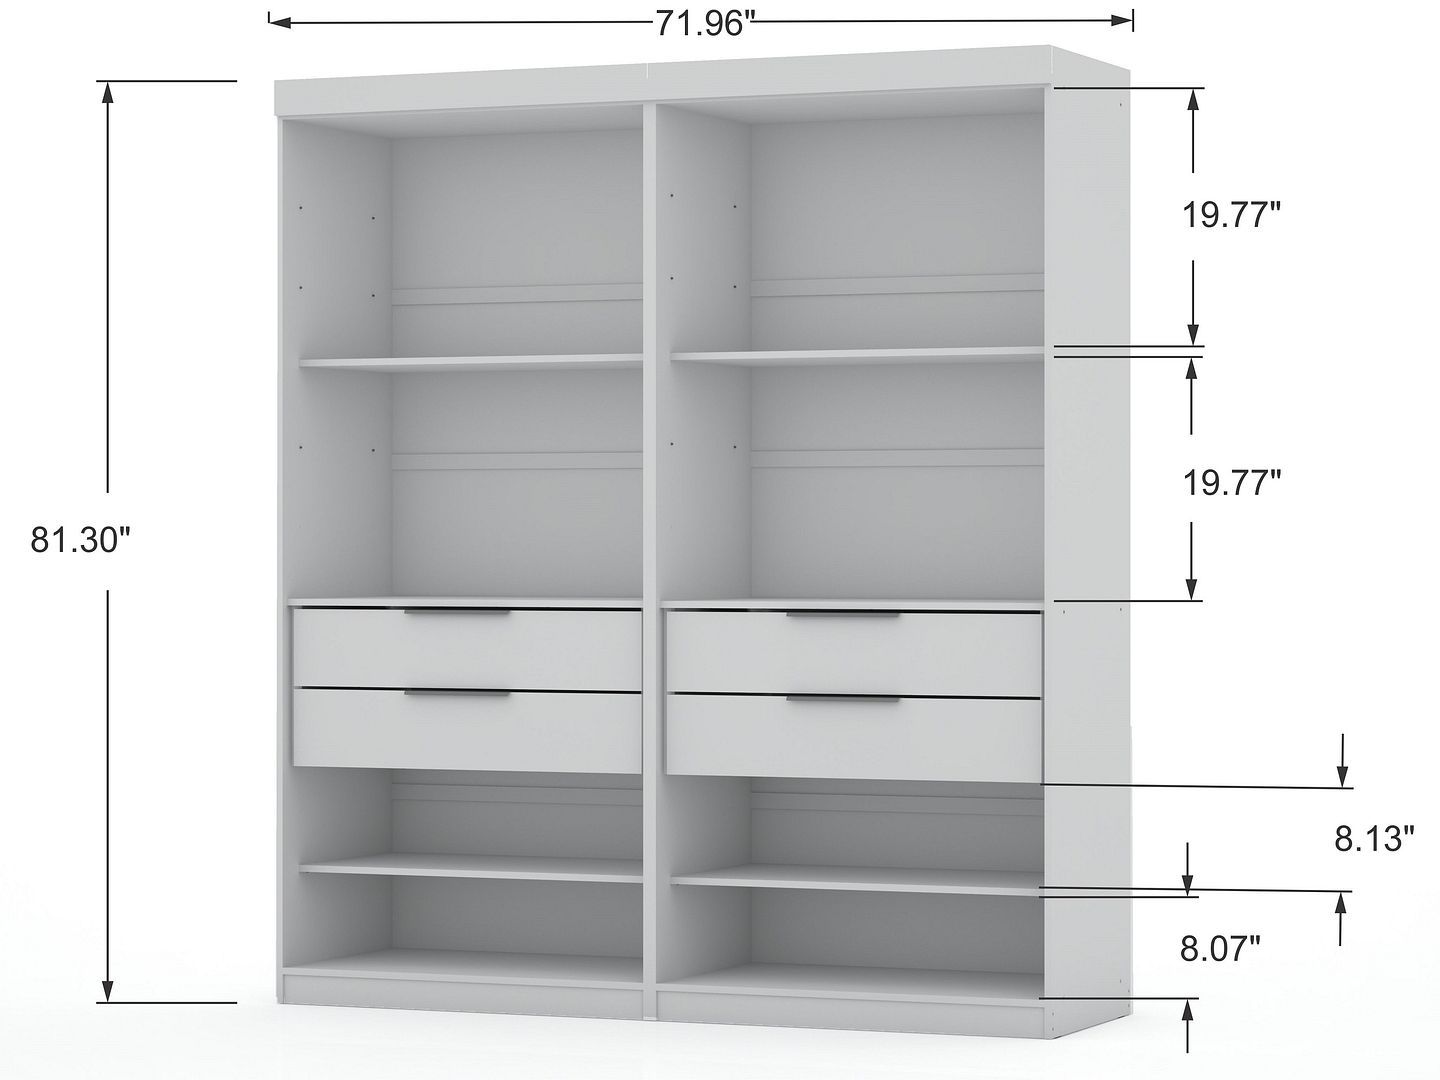 Mulberry Open 2 Sectional Closet - Set of 2